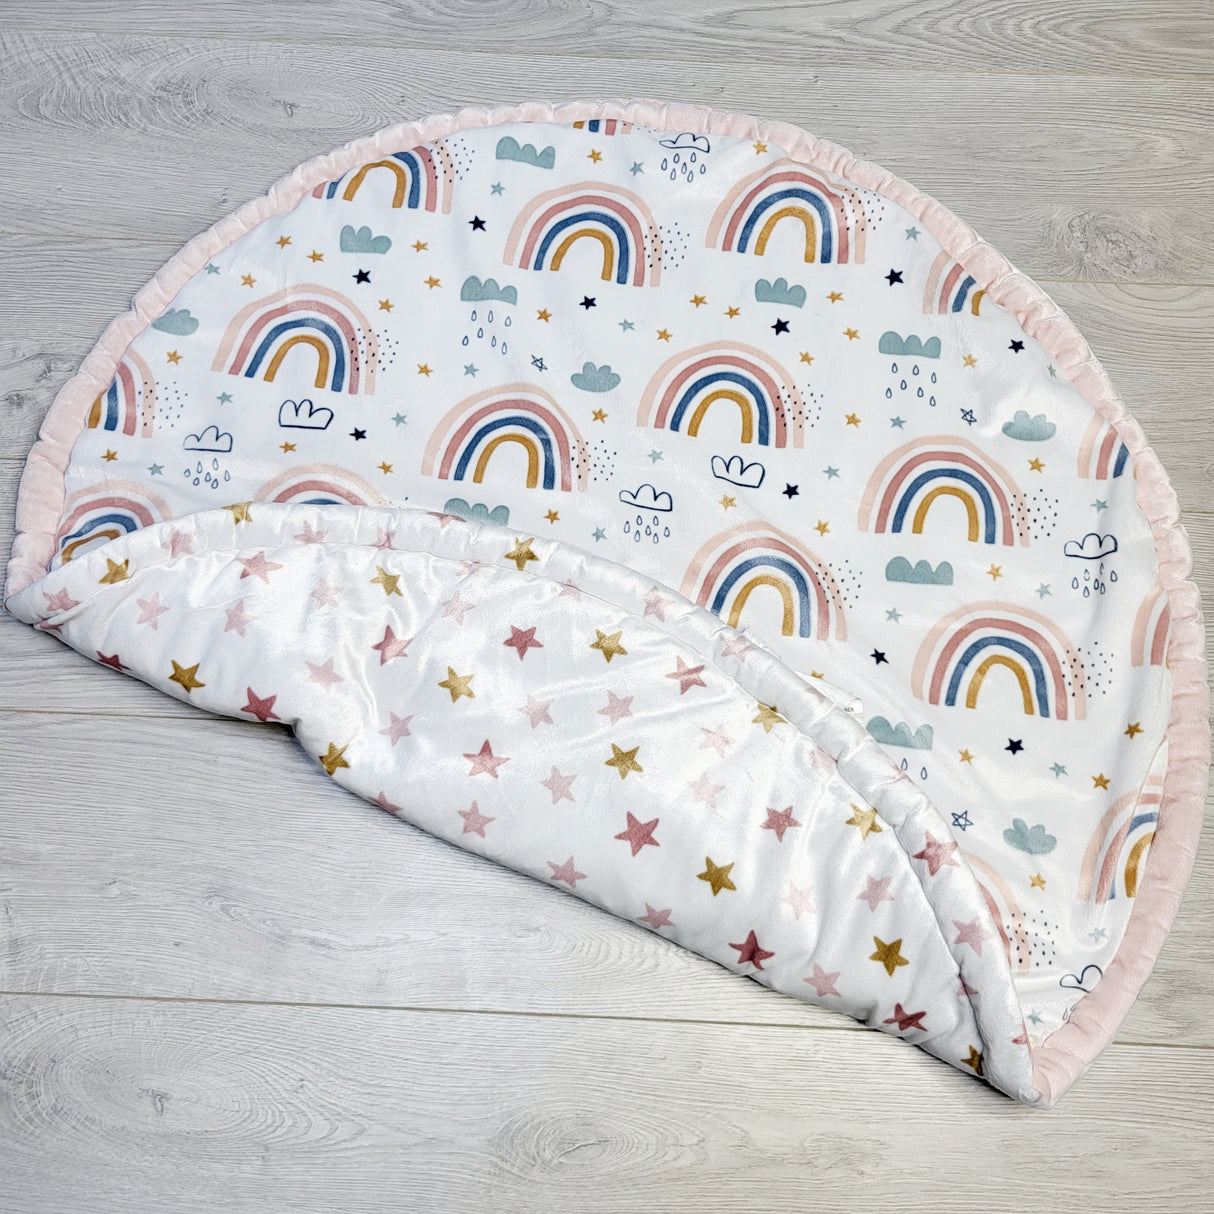 COWN1 - Minky reversible tummy time / play mat /rug